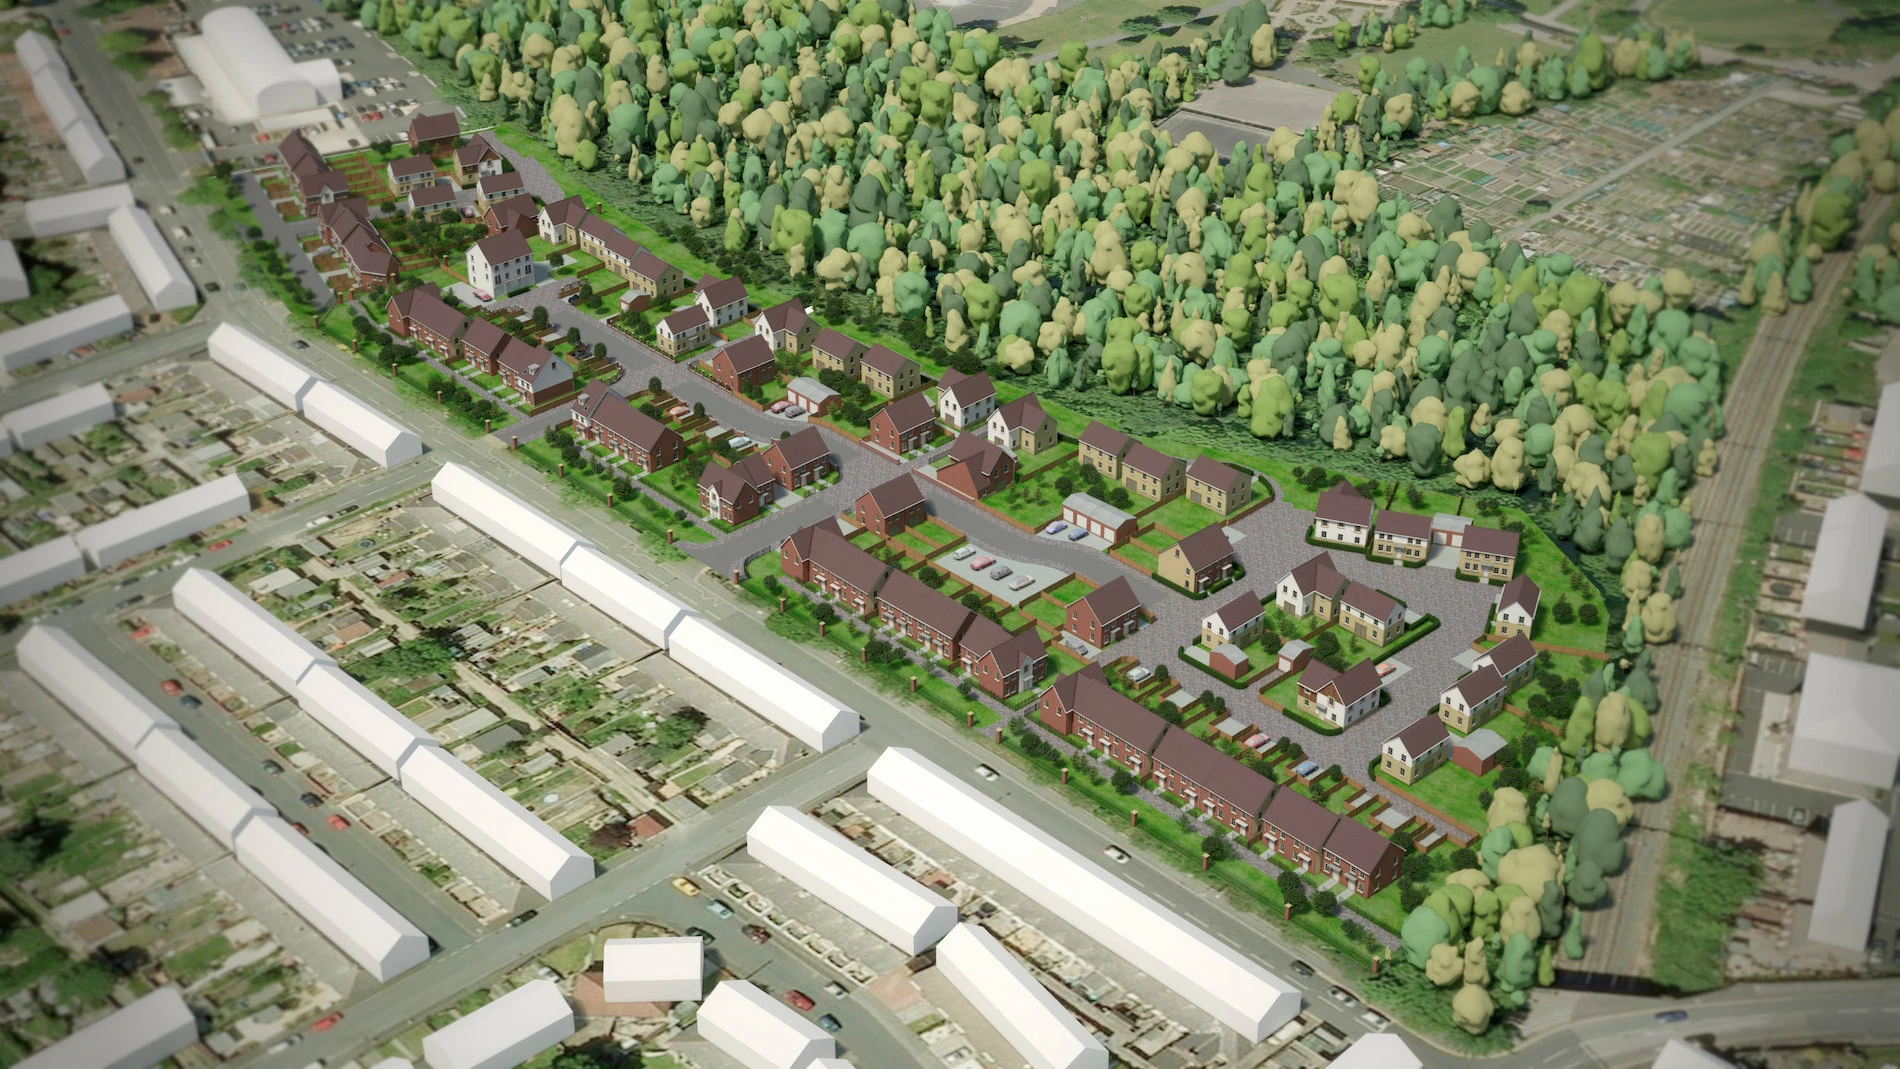 Outline planning permission has already been granted for a new residential development at the site.